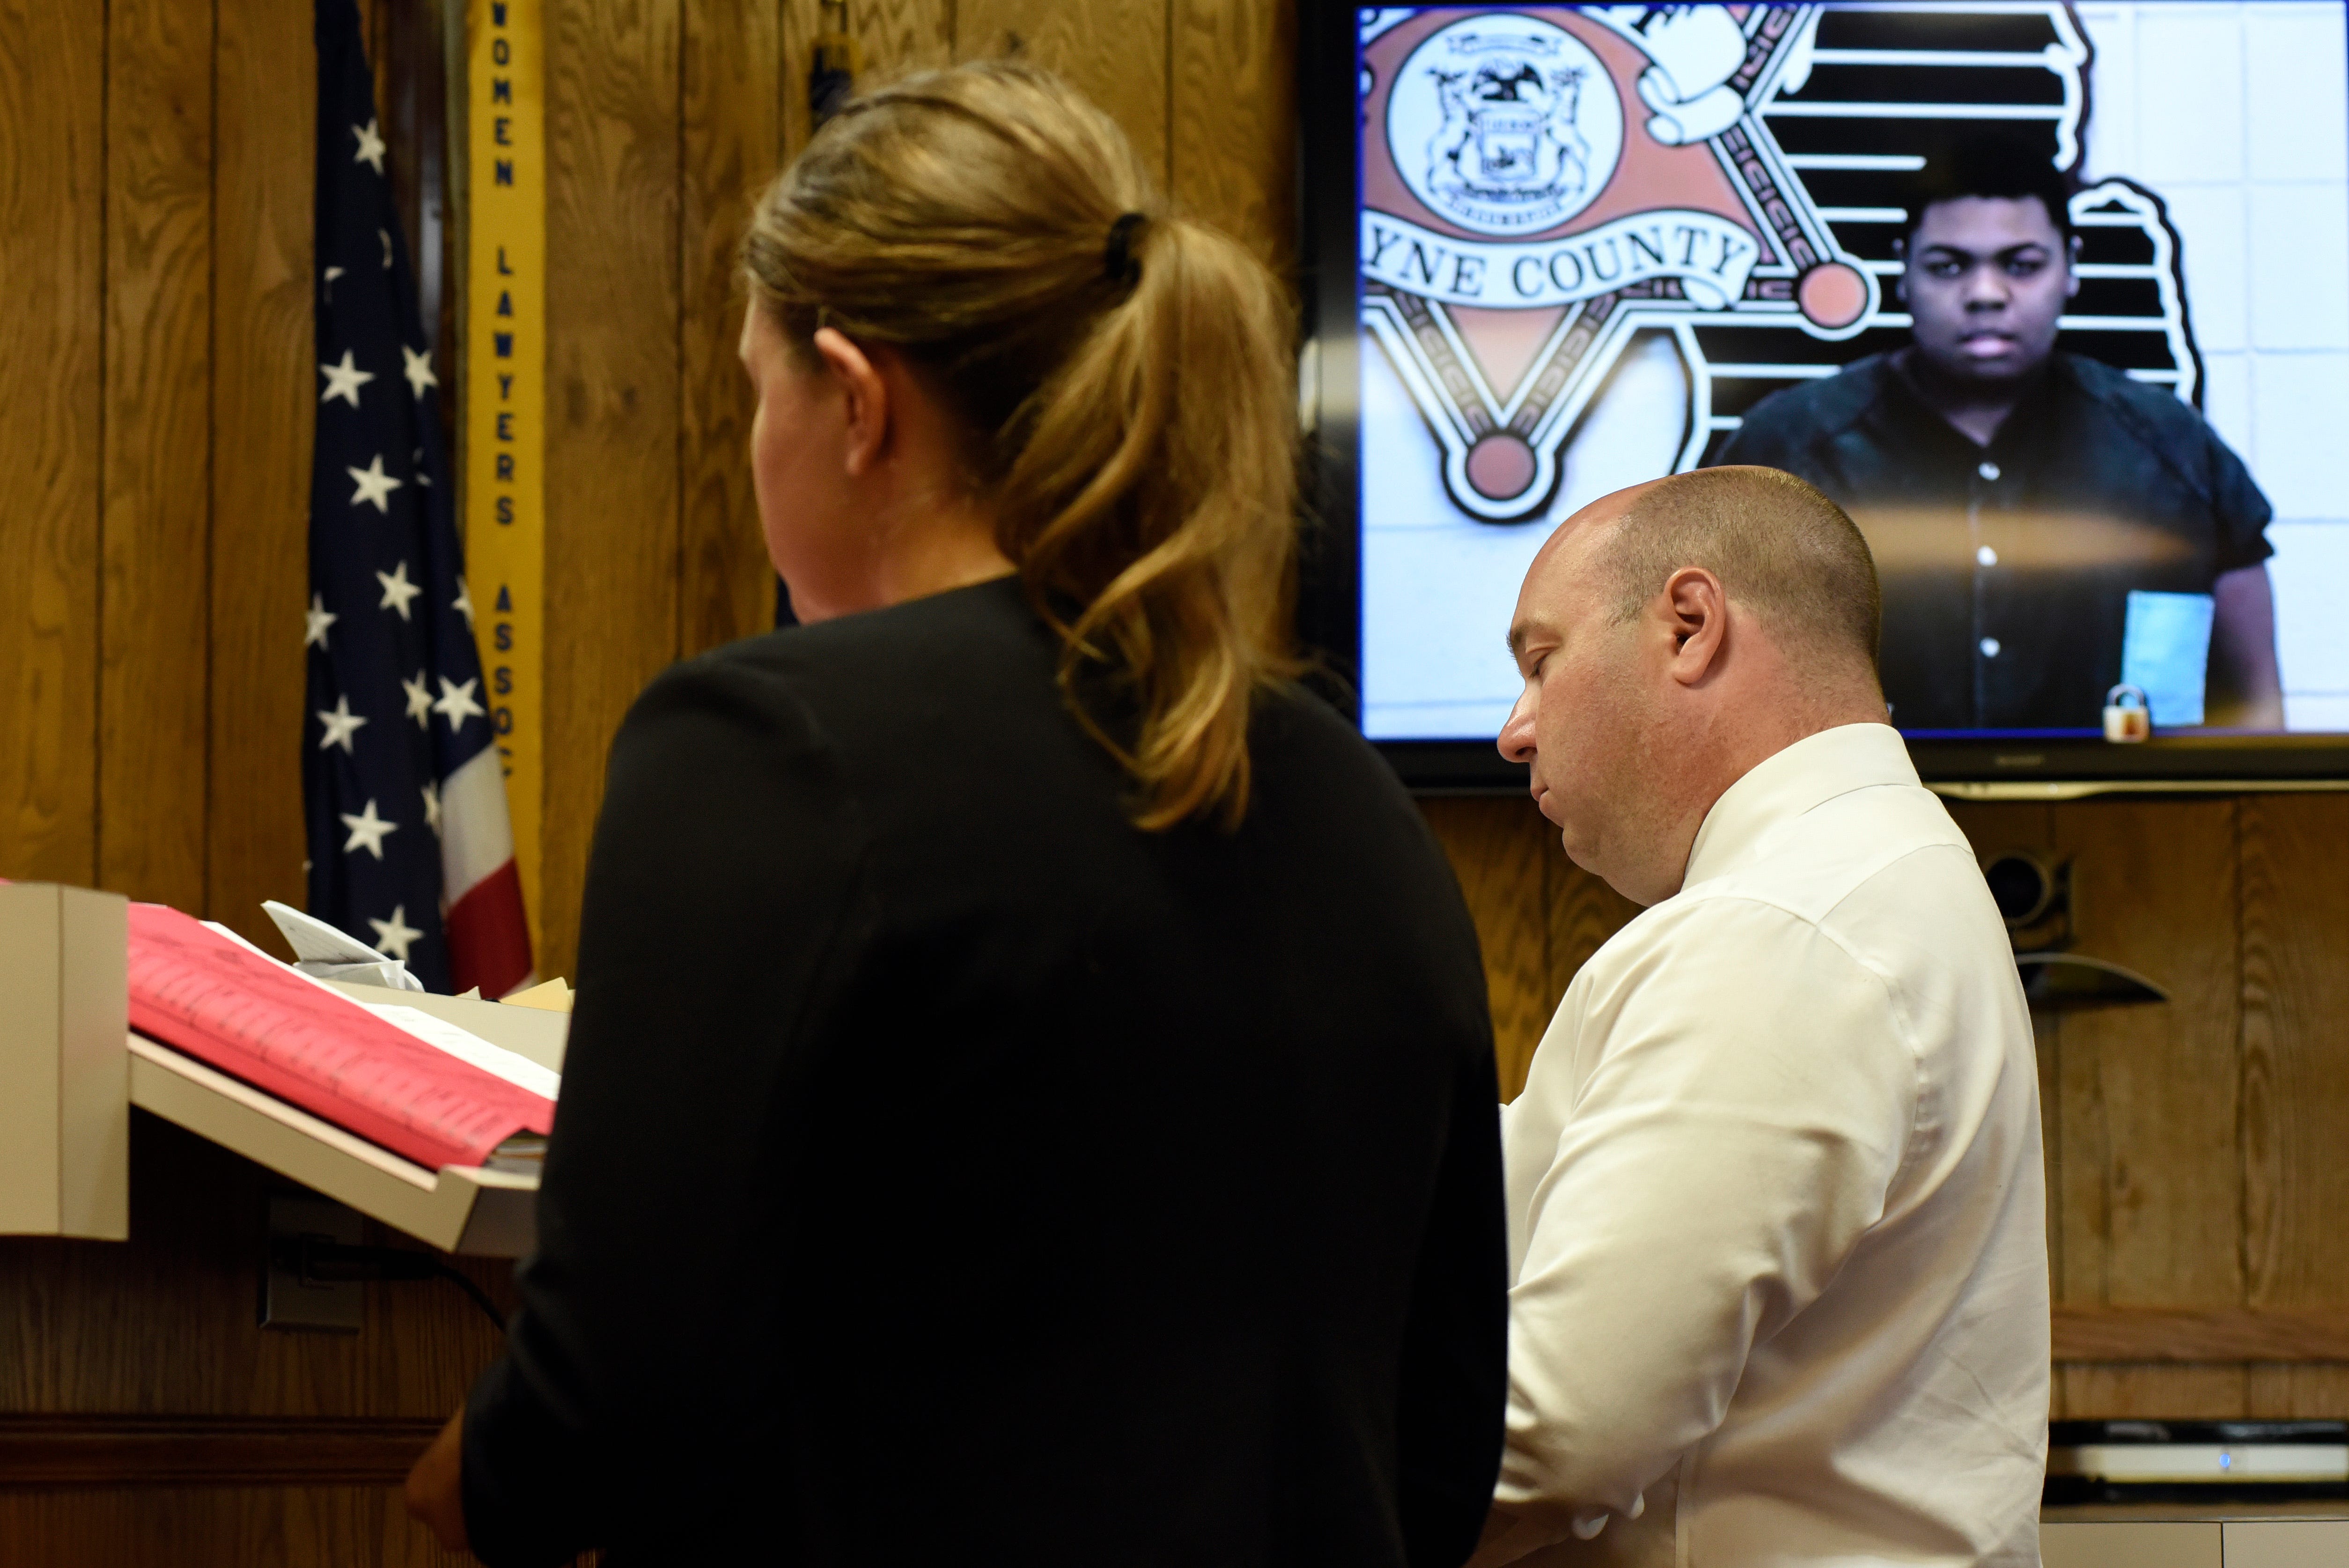 Wayne County Assistant Prosecutor Elizabeth Dornik, left, and defense attorney William Amadeo address Judge Laura Mack during a hearing for Darian Michael Smith-Blackmon, pictured on video screen,  Aug. 27, 2019, at 29th District Court in Wayne, Mich. Blackmon was found incompetent to stand trial in a man's death but prosecutors could still charge him if he becomes competent.